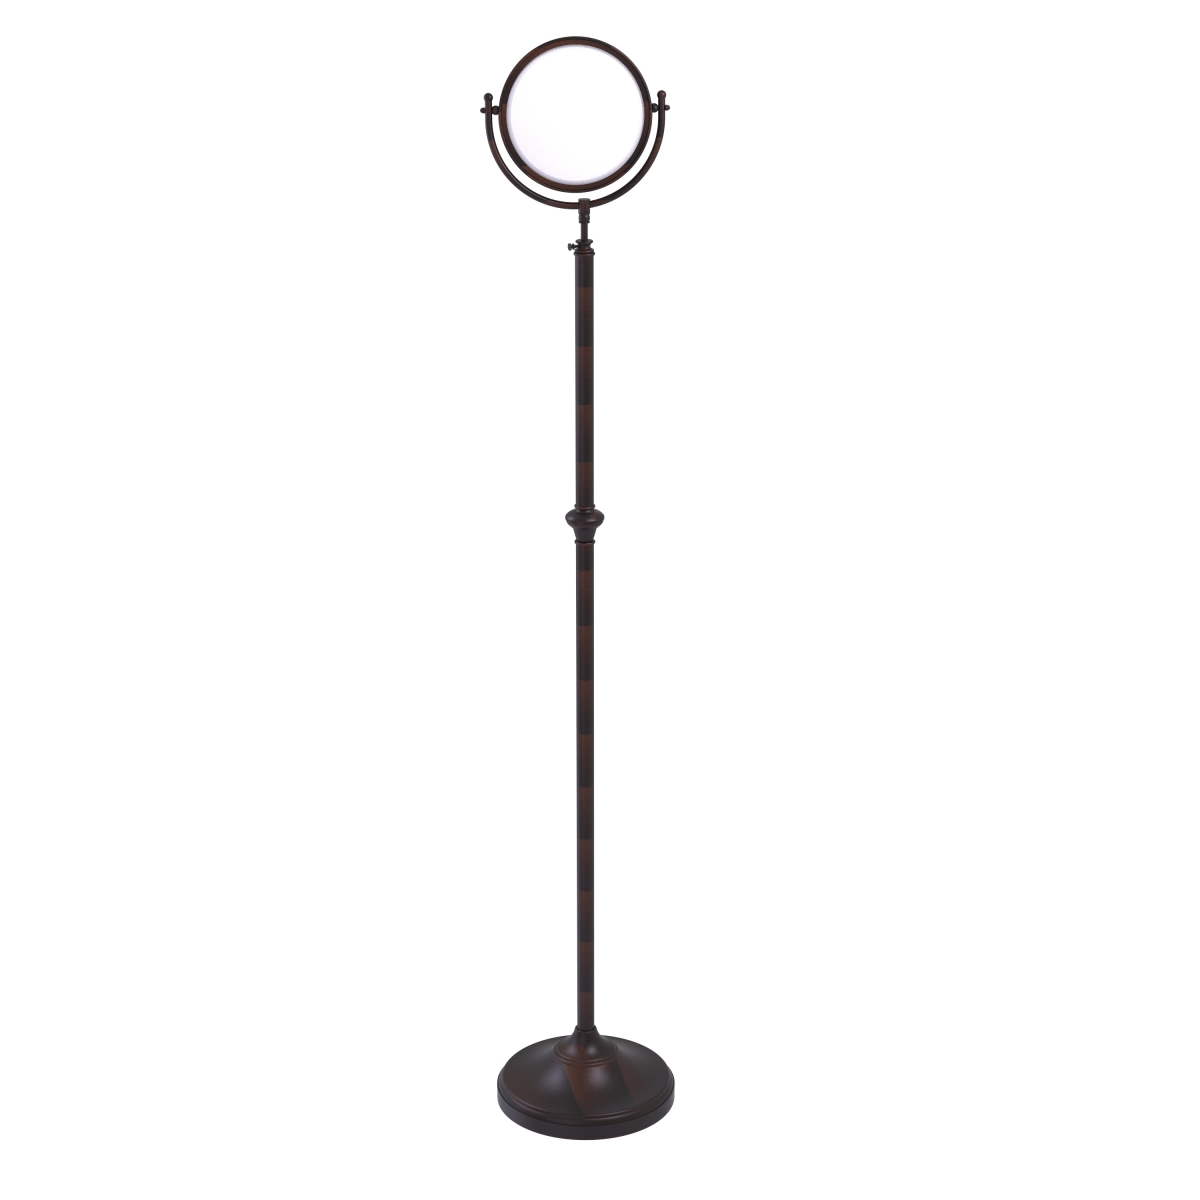 Allied Brass DMF-2-5X-VB 8 in. dia. Adjustable Height Floor Standing Make-Up Mirror with 5X Magnification, Venetian Bronze